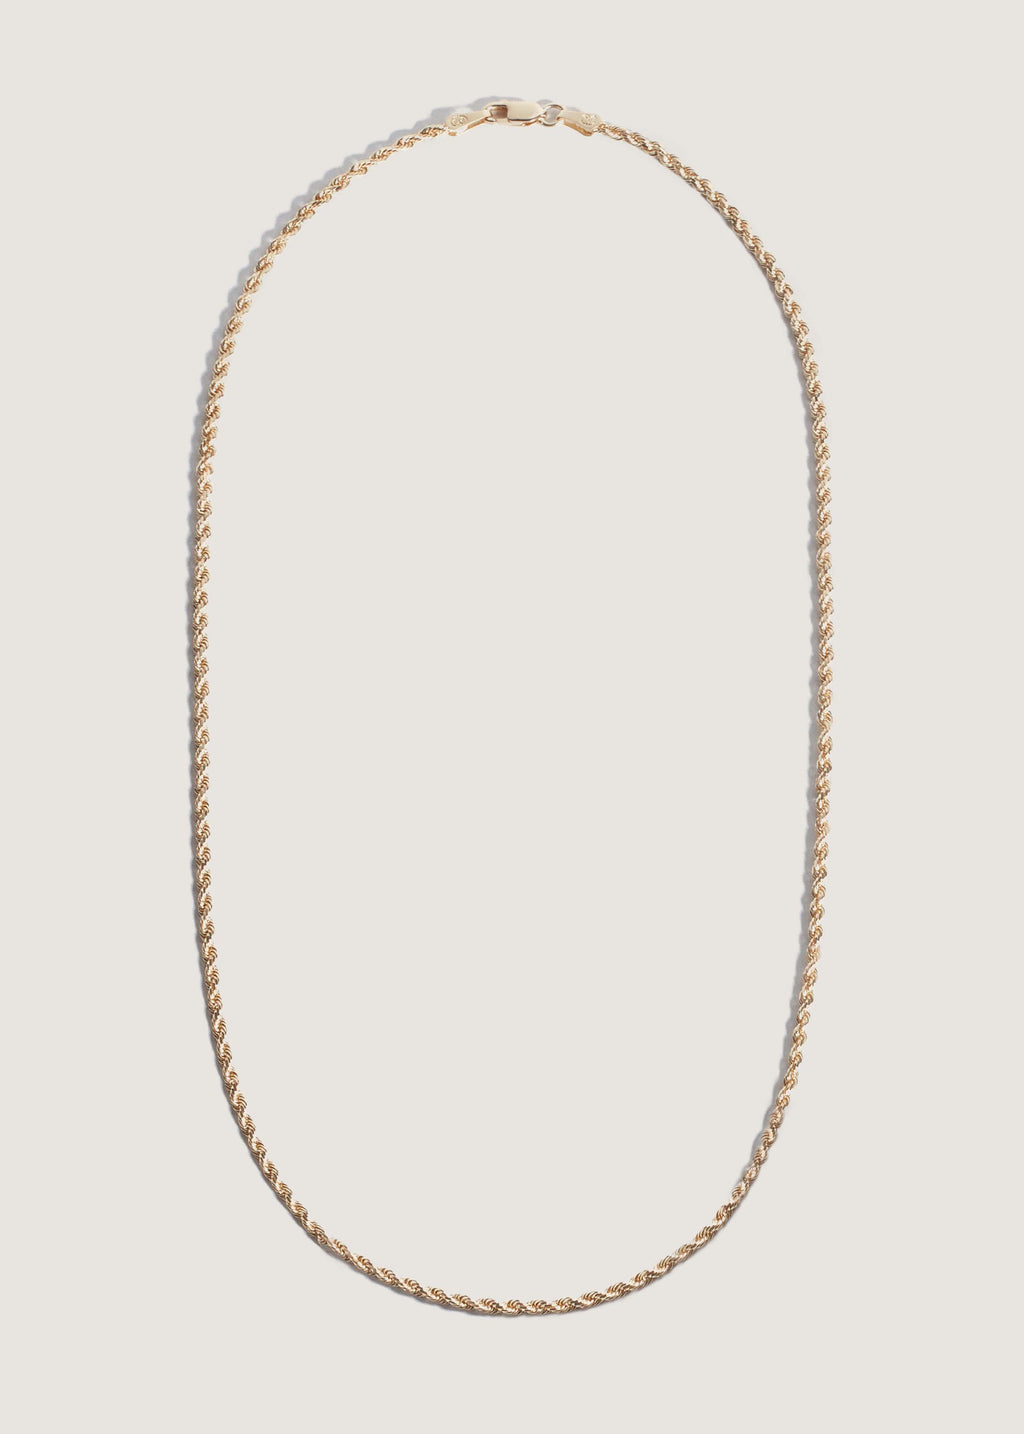 alt="Rope Chain Necklace"